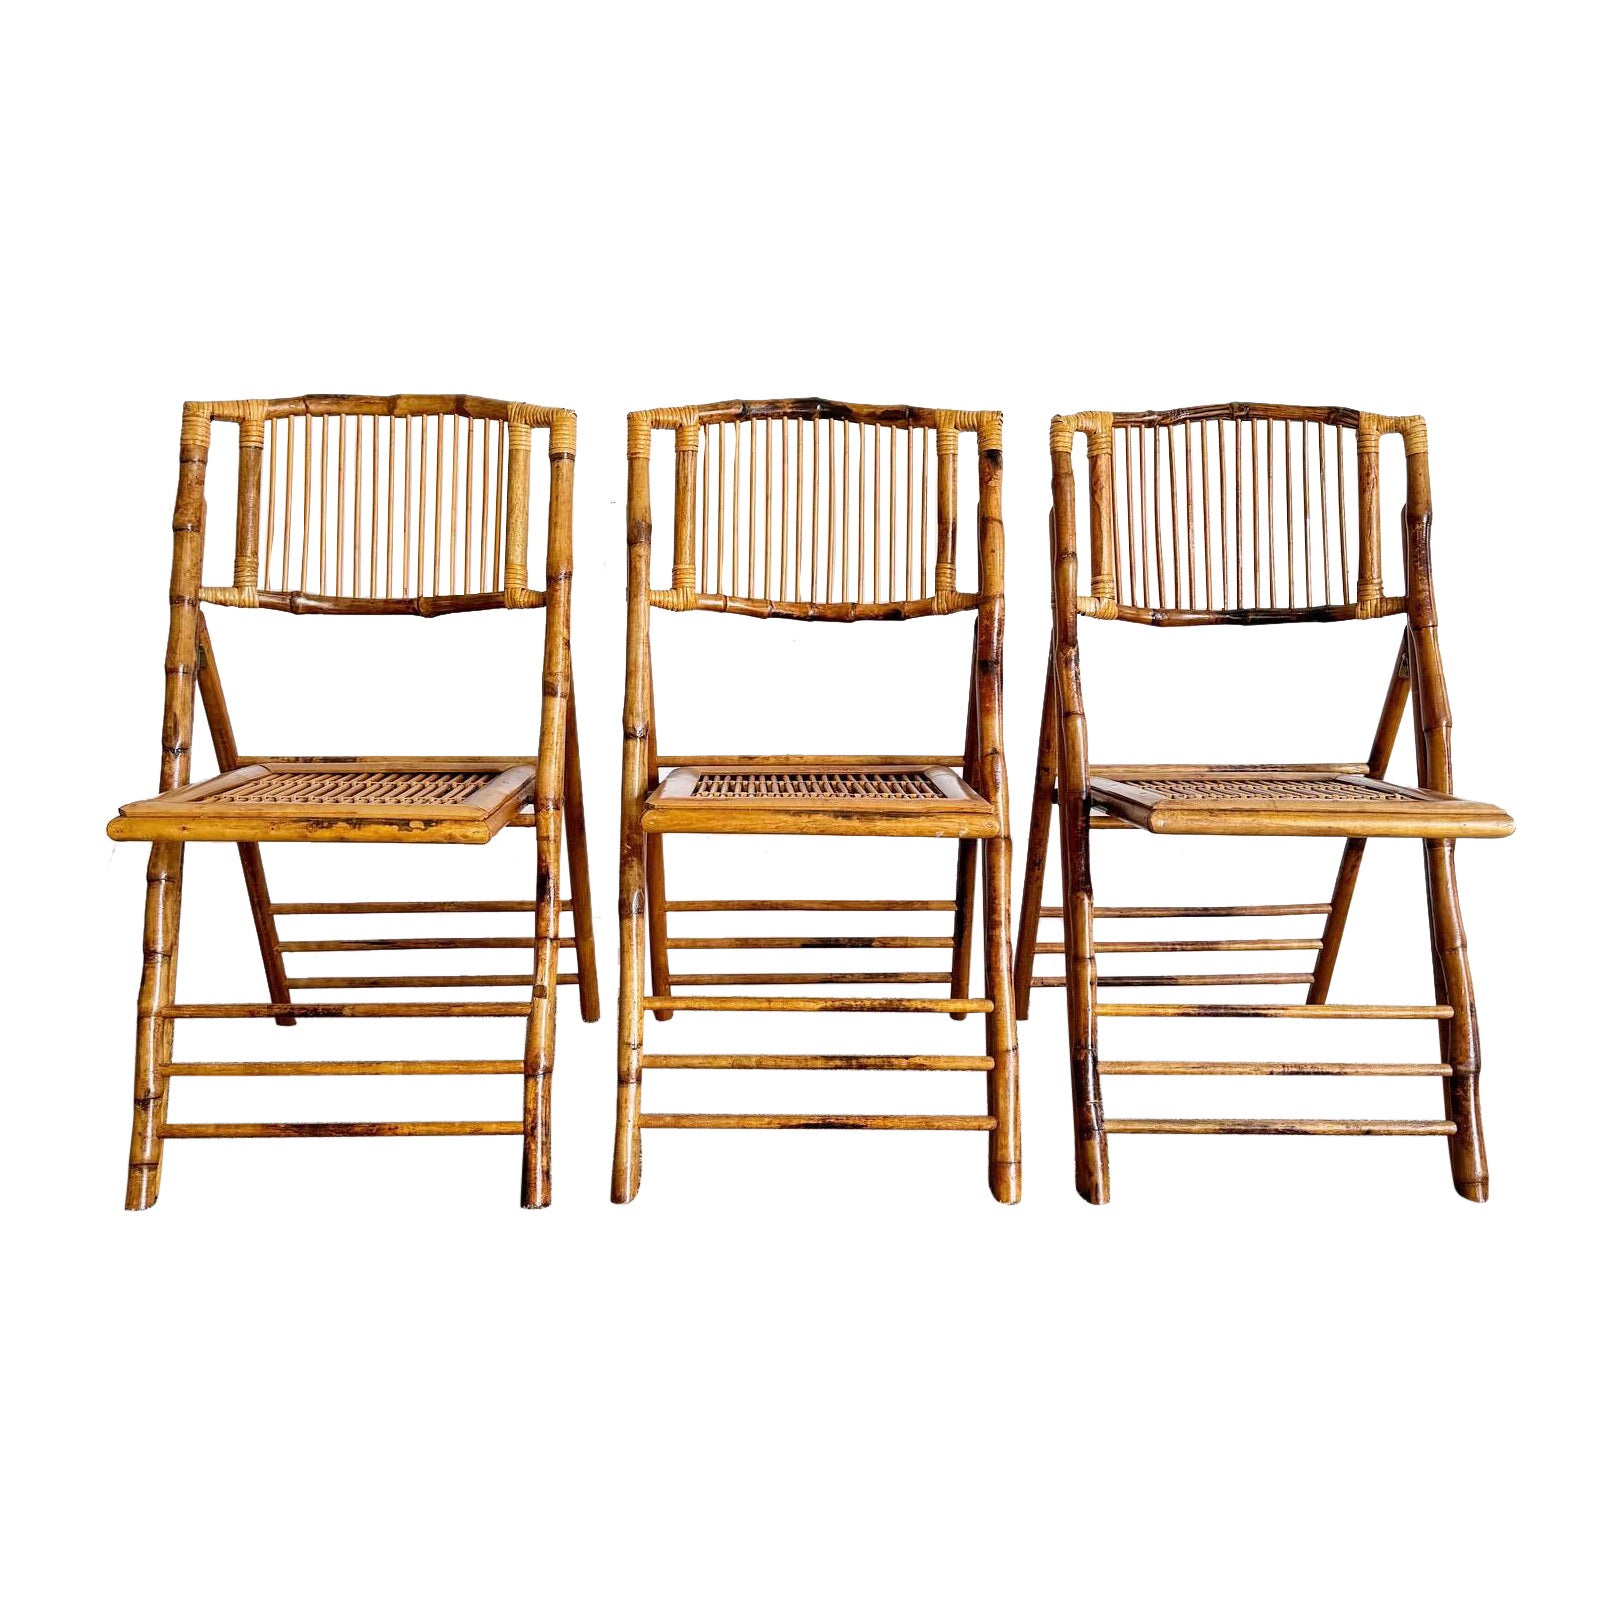 Boho Chic Tortoise Shell Bamboo Rattan Fold-Up Dining Chairs - Set of 3 For Sale